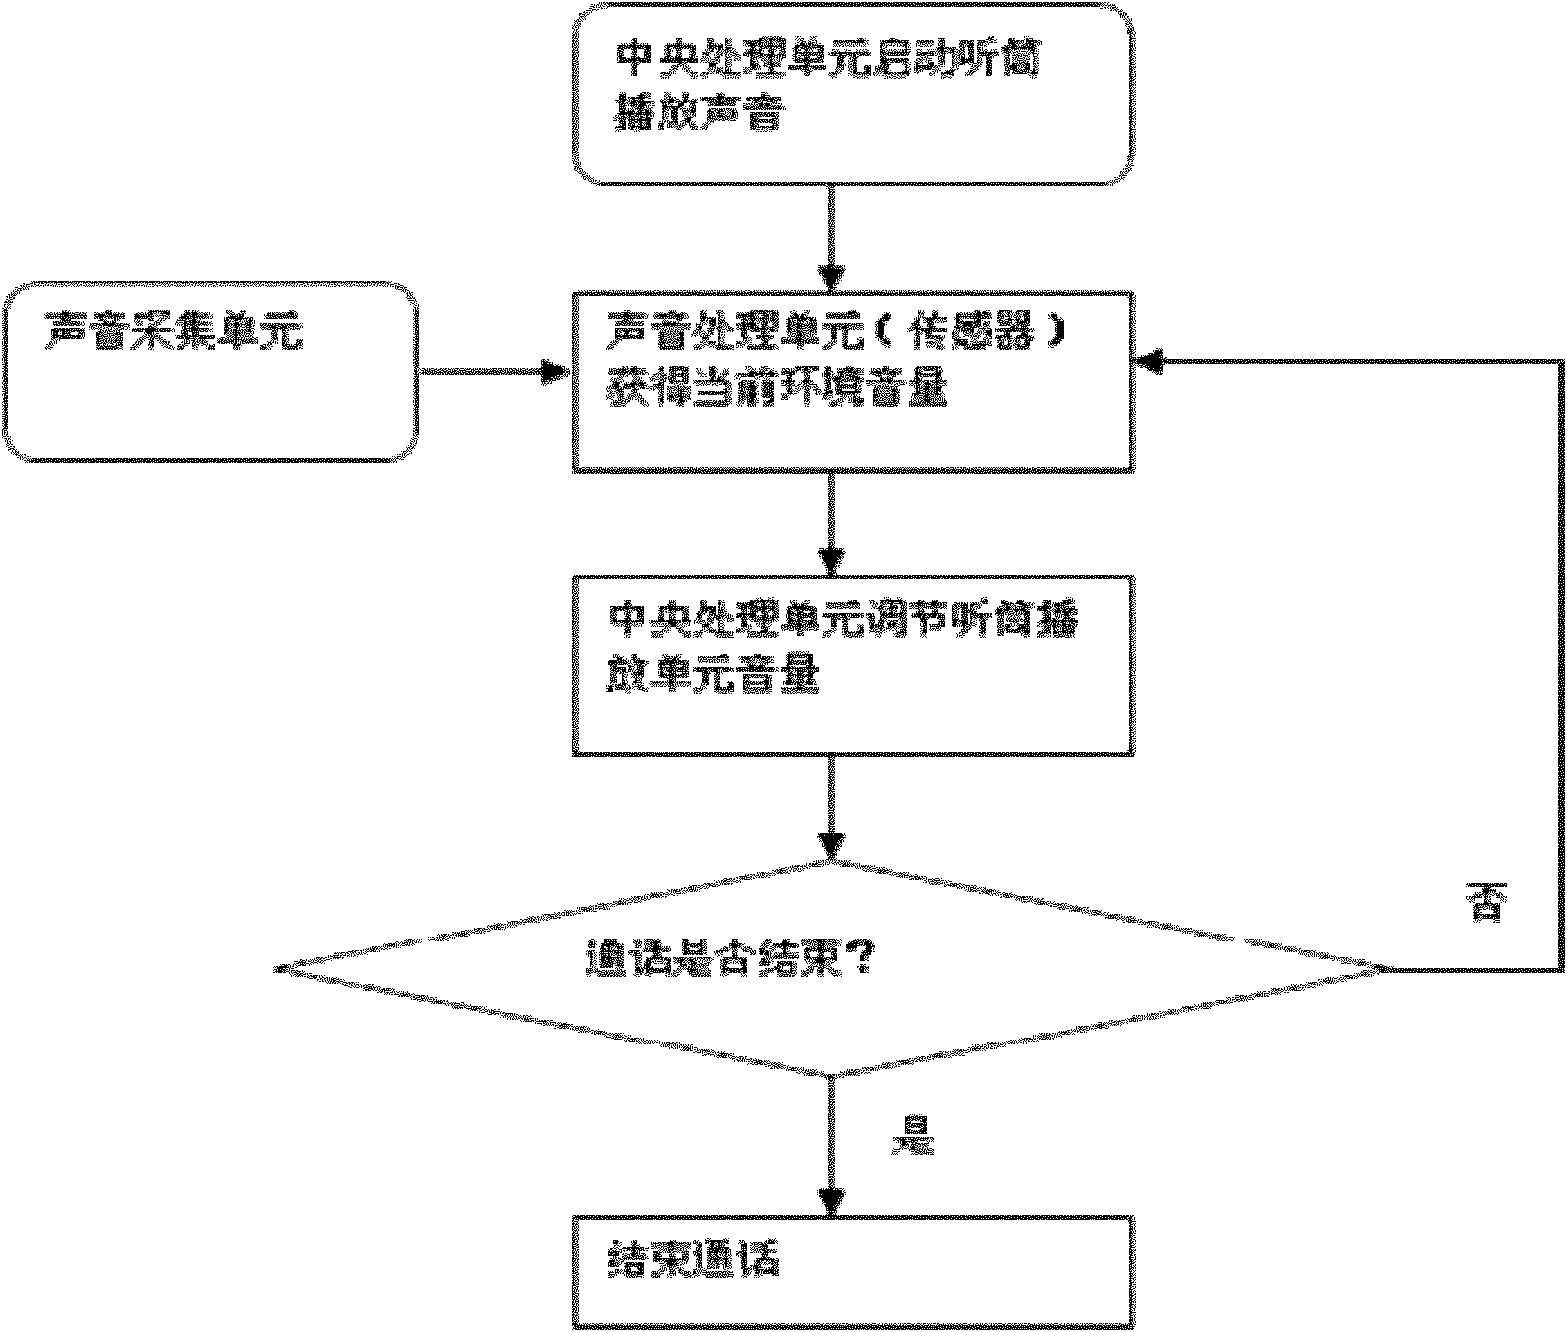 Method and device for intelligently adjusting receiver volume of handheld device